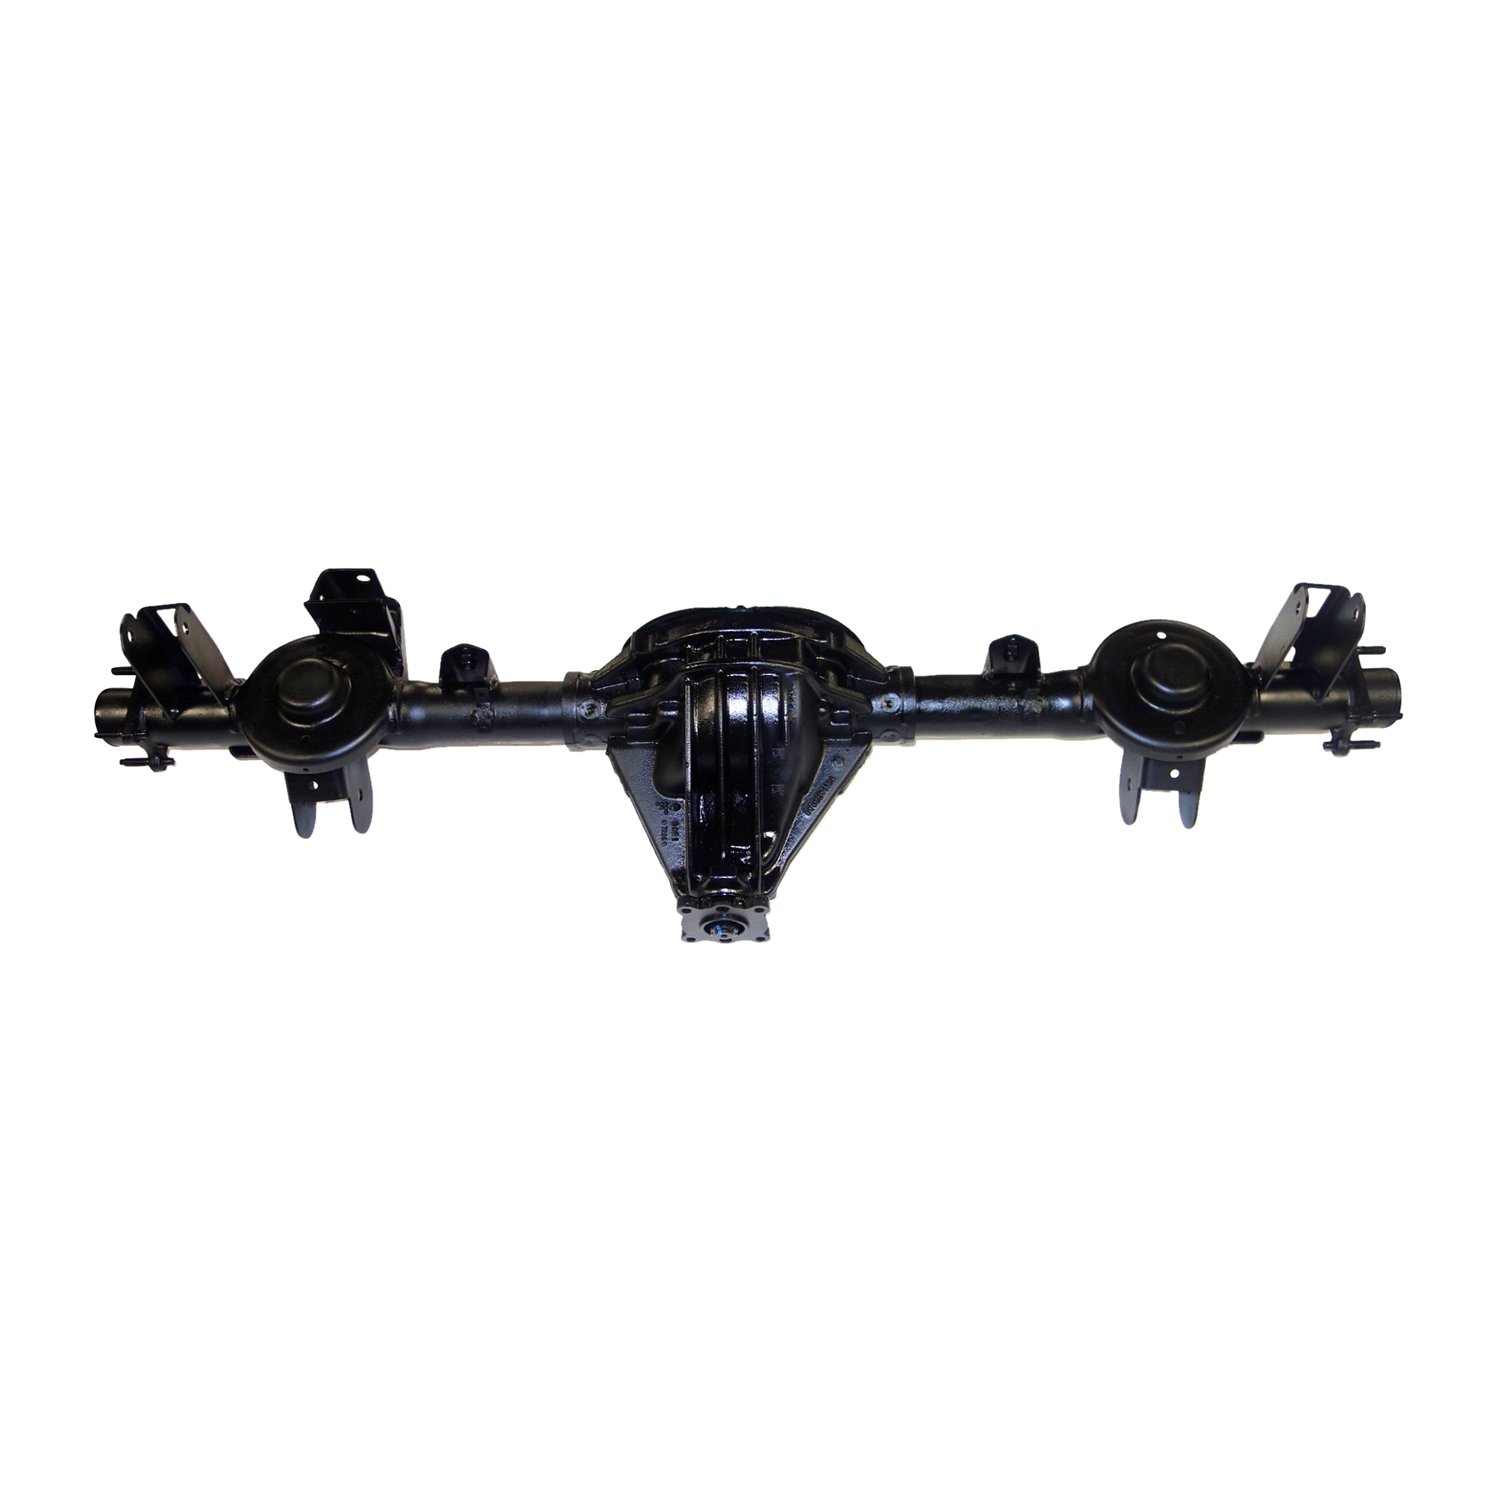 Remanufactured Axle Assy for Chy 8.25" 2005 Liberty 4.11 , 2.4l & 3.7l w/o ABS, Posi LSD